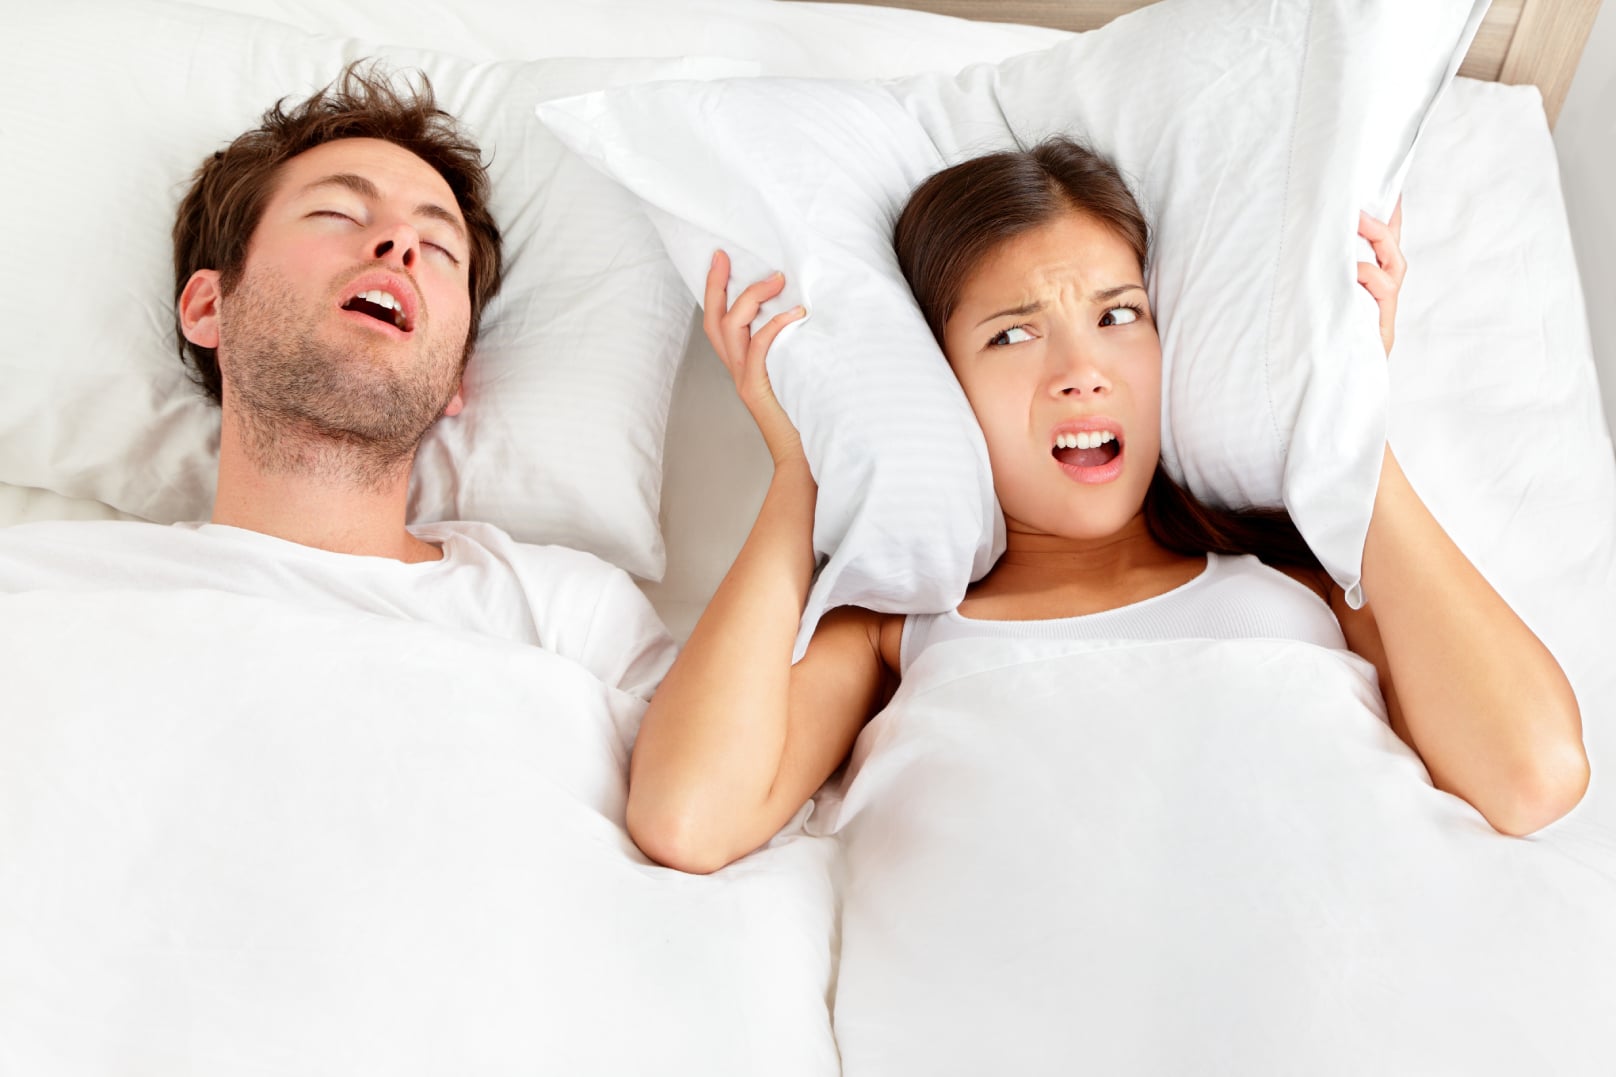 A woman and man in a bed. The woman is covering her ears with a pillow while the man snores